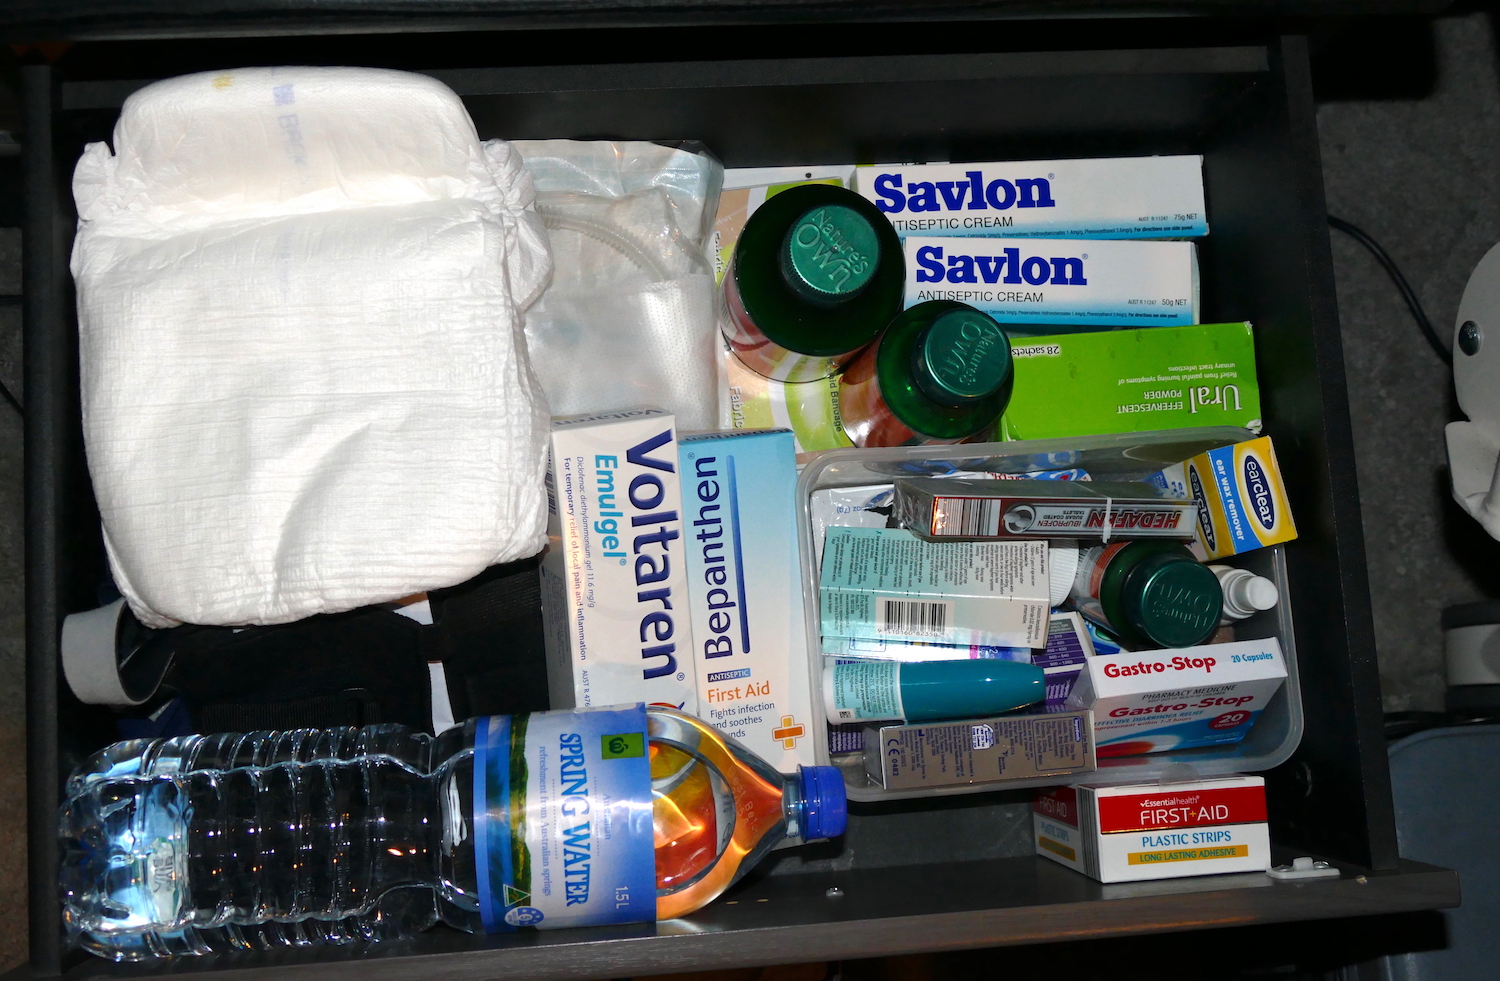 the top drawer contains more over the counter stuff